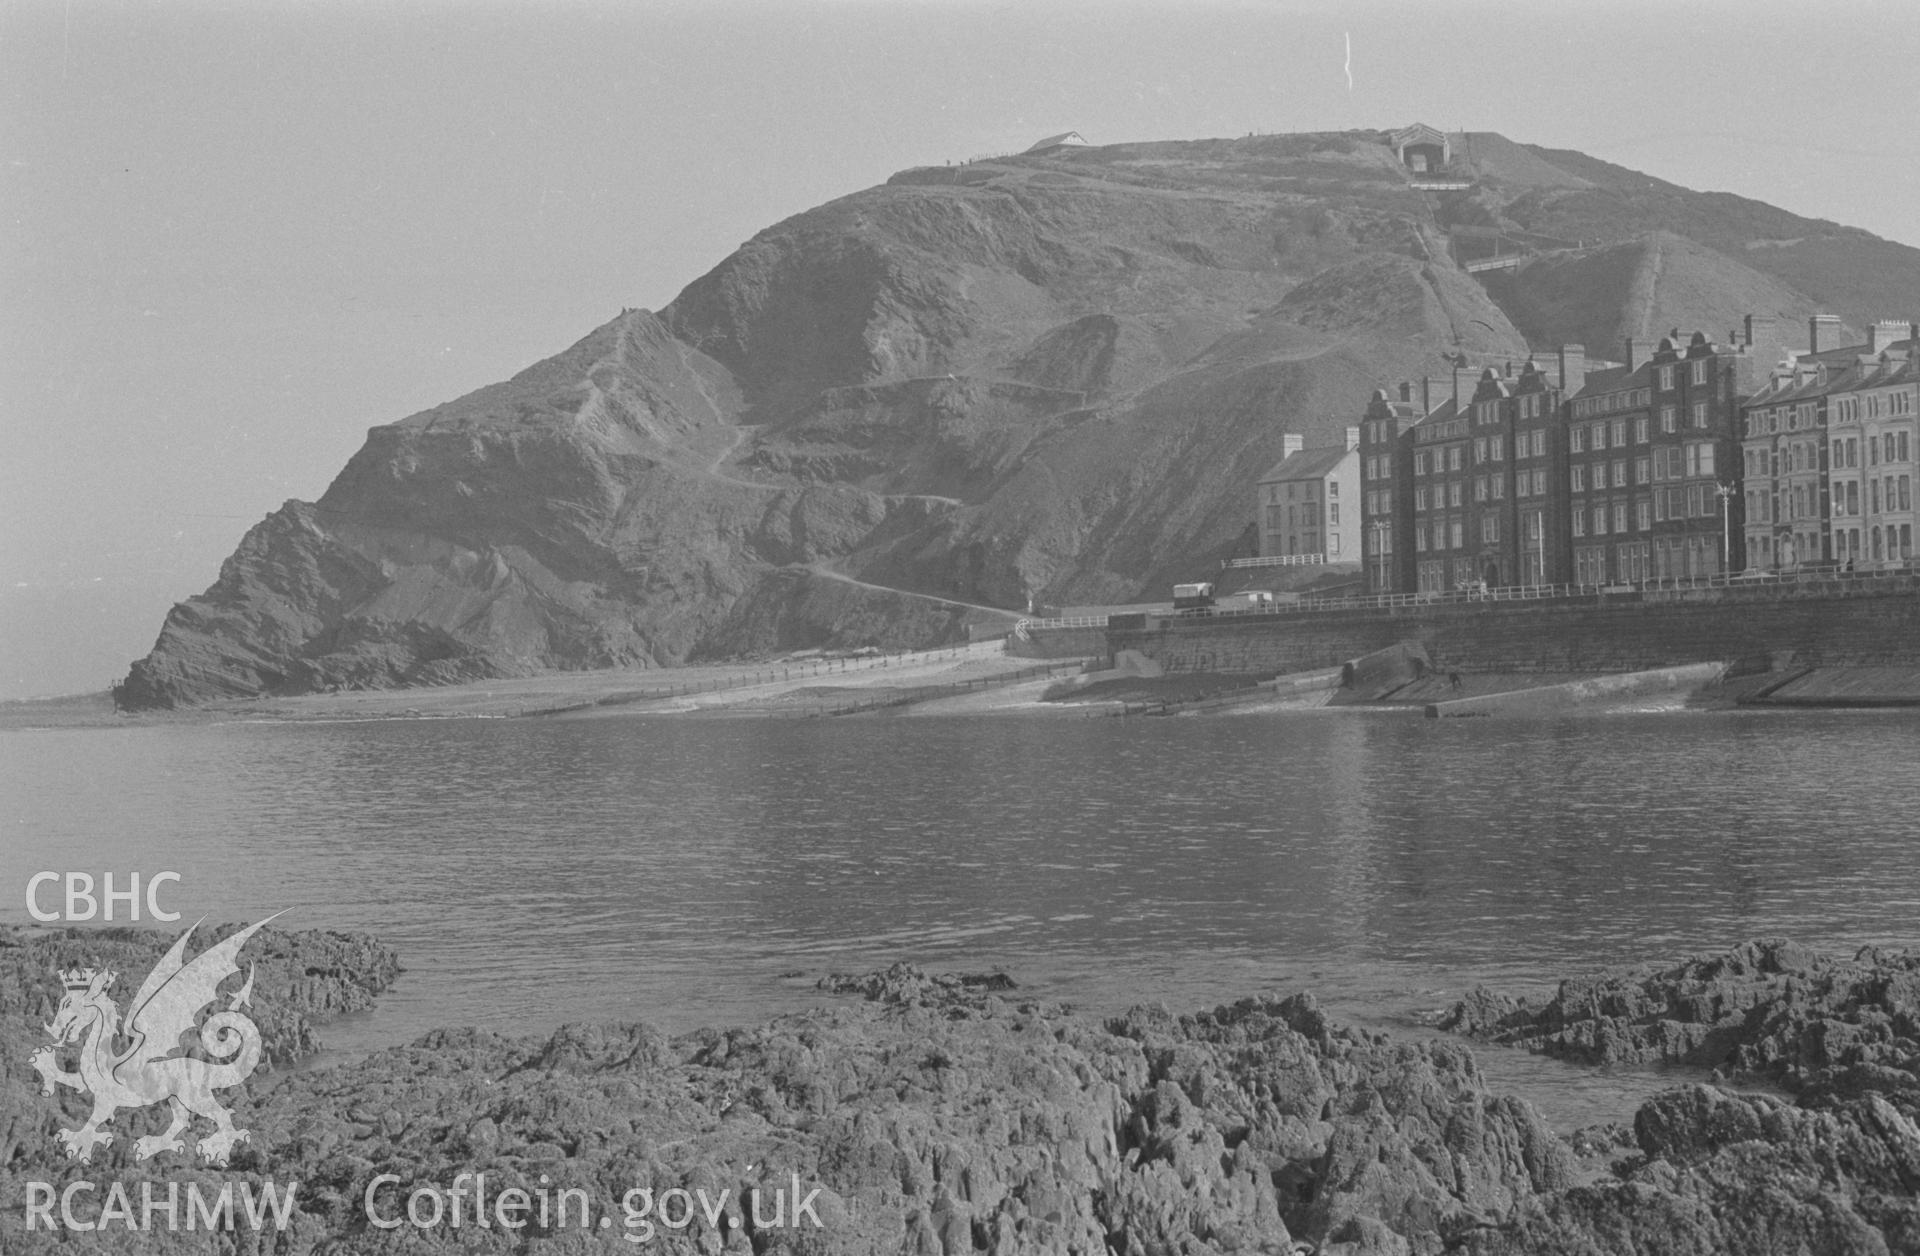 Digital copy of black & white negative showing Constitution Hill, Cliff Railway, Craiglas house and Alexandra Hall, Aberystwyth. Photograph by Arthur O. Chater, 9th April 1968 looking north from the rocks opposite the Queen's Hotel at Grid Ref SN 583 822.